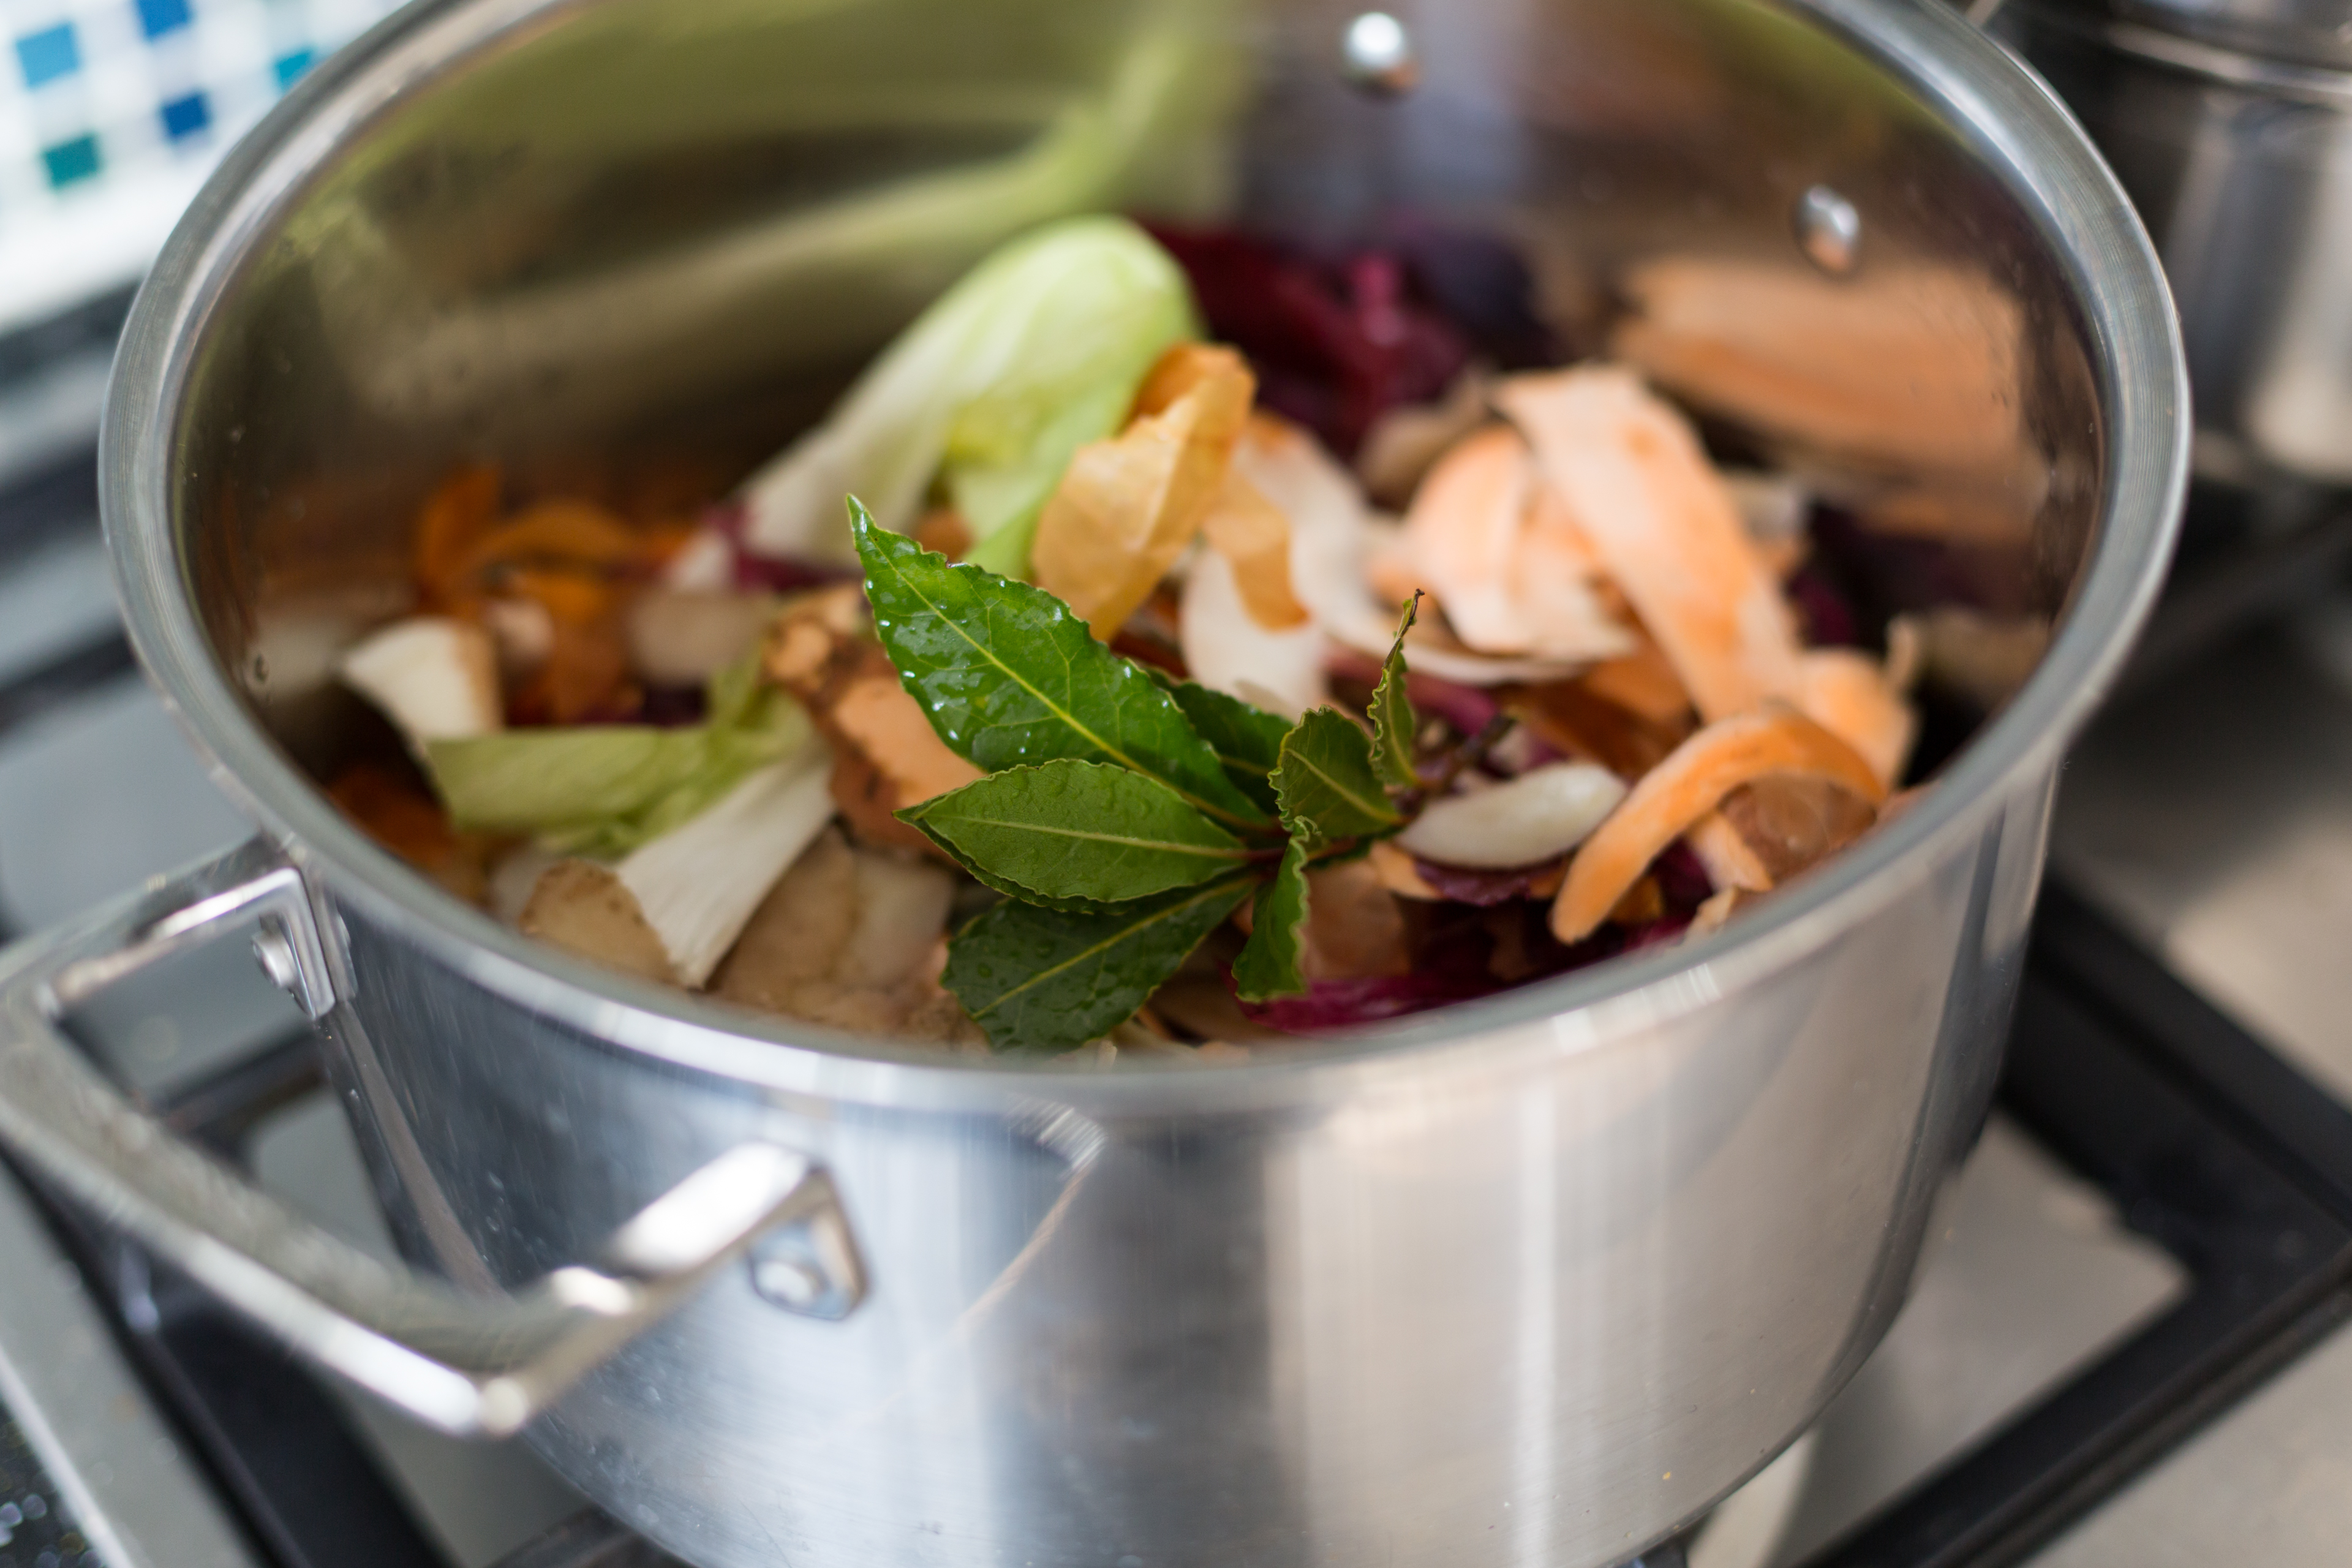 Vegetable peel stock, no waste within, reduce your food waste, zero waste, plastic free, food blogging